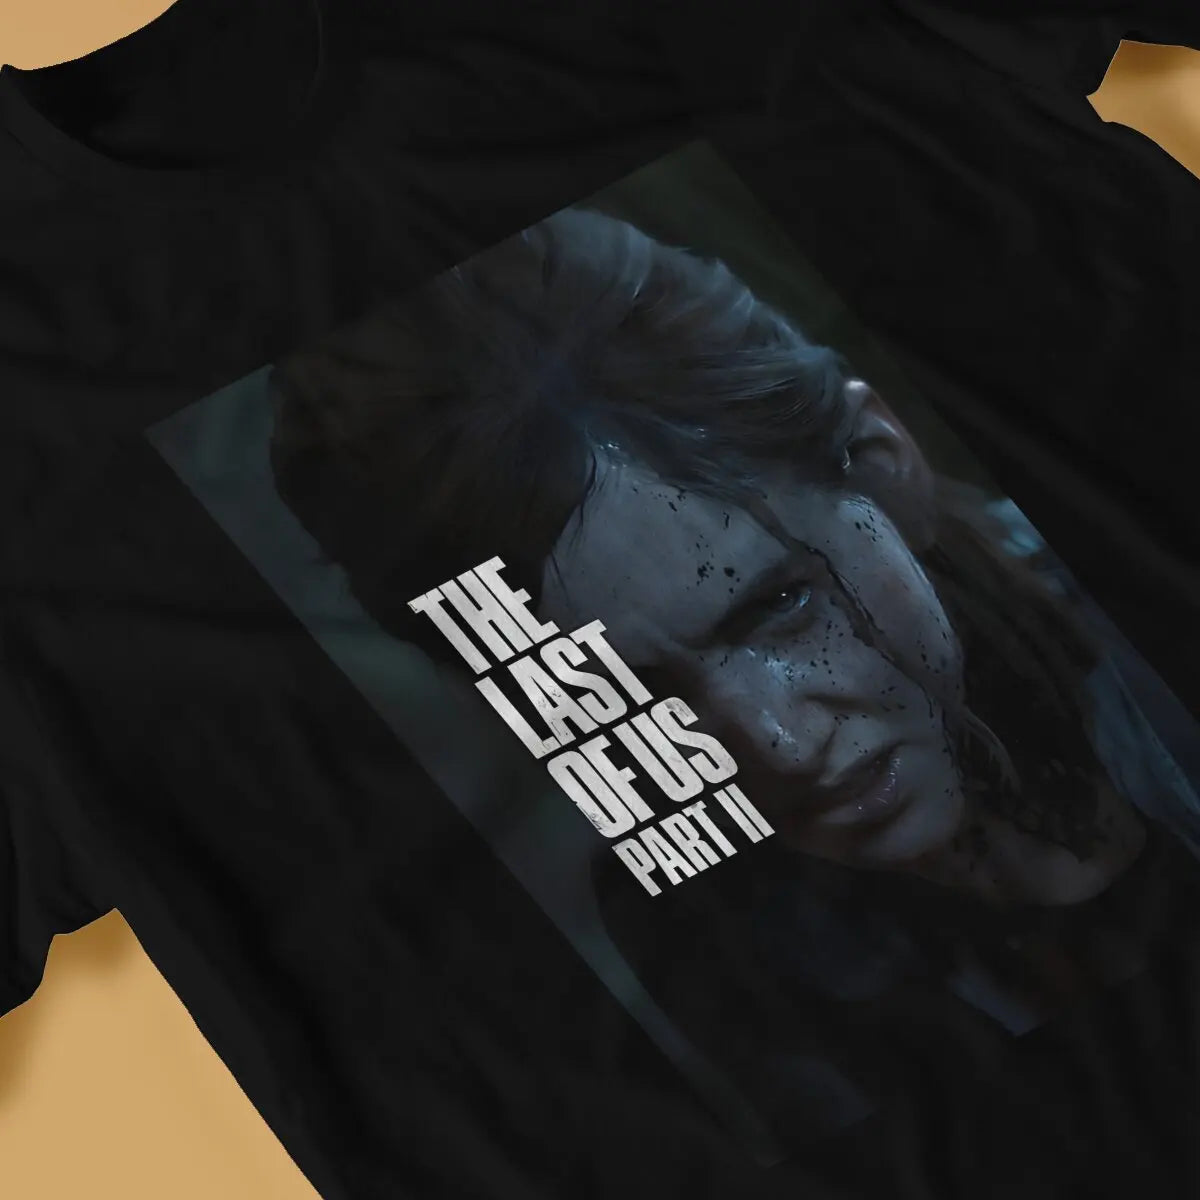 The Last of Us Part II Ellie Williams Tshirt - Available at 2Fast2See.co